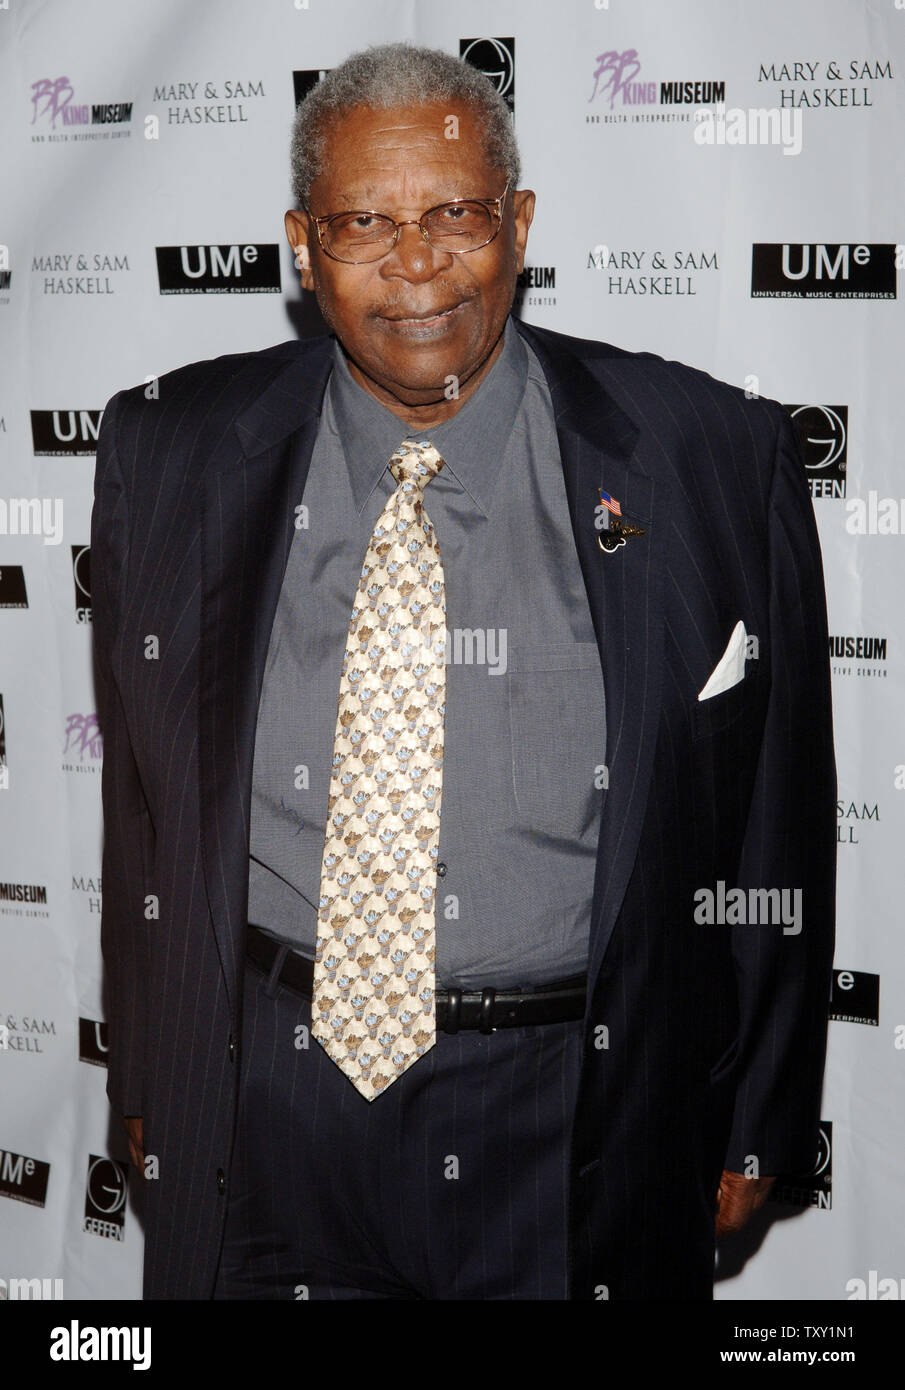 Blues legend B.B. King arrives for a celebration and fundraiser in honor of his 80th birthday at a private residence in Encino, California September 20, 2005. The event will benefit the forthcoming B.B. King Museum in Indianola, Mississippi.    (UPI Photo/Jim Ruymen) Stock Photo